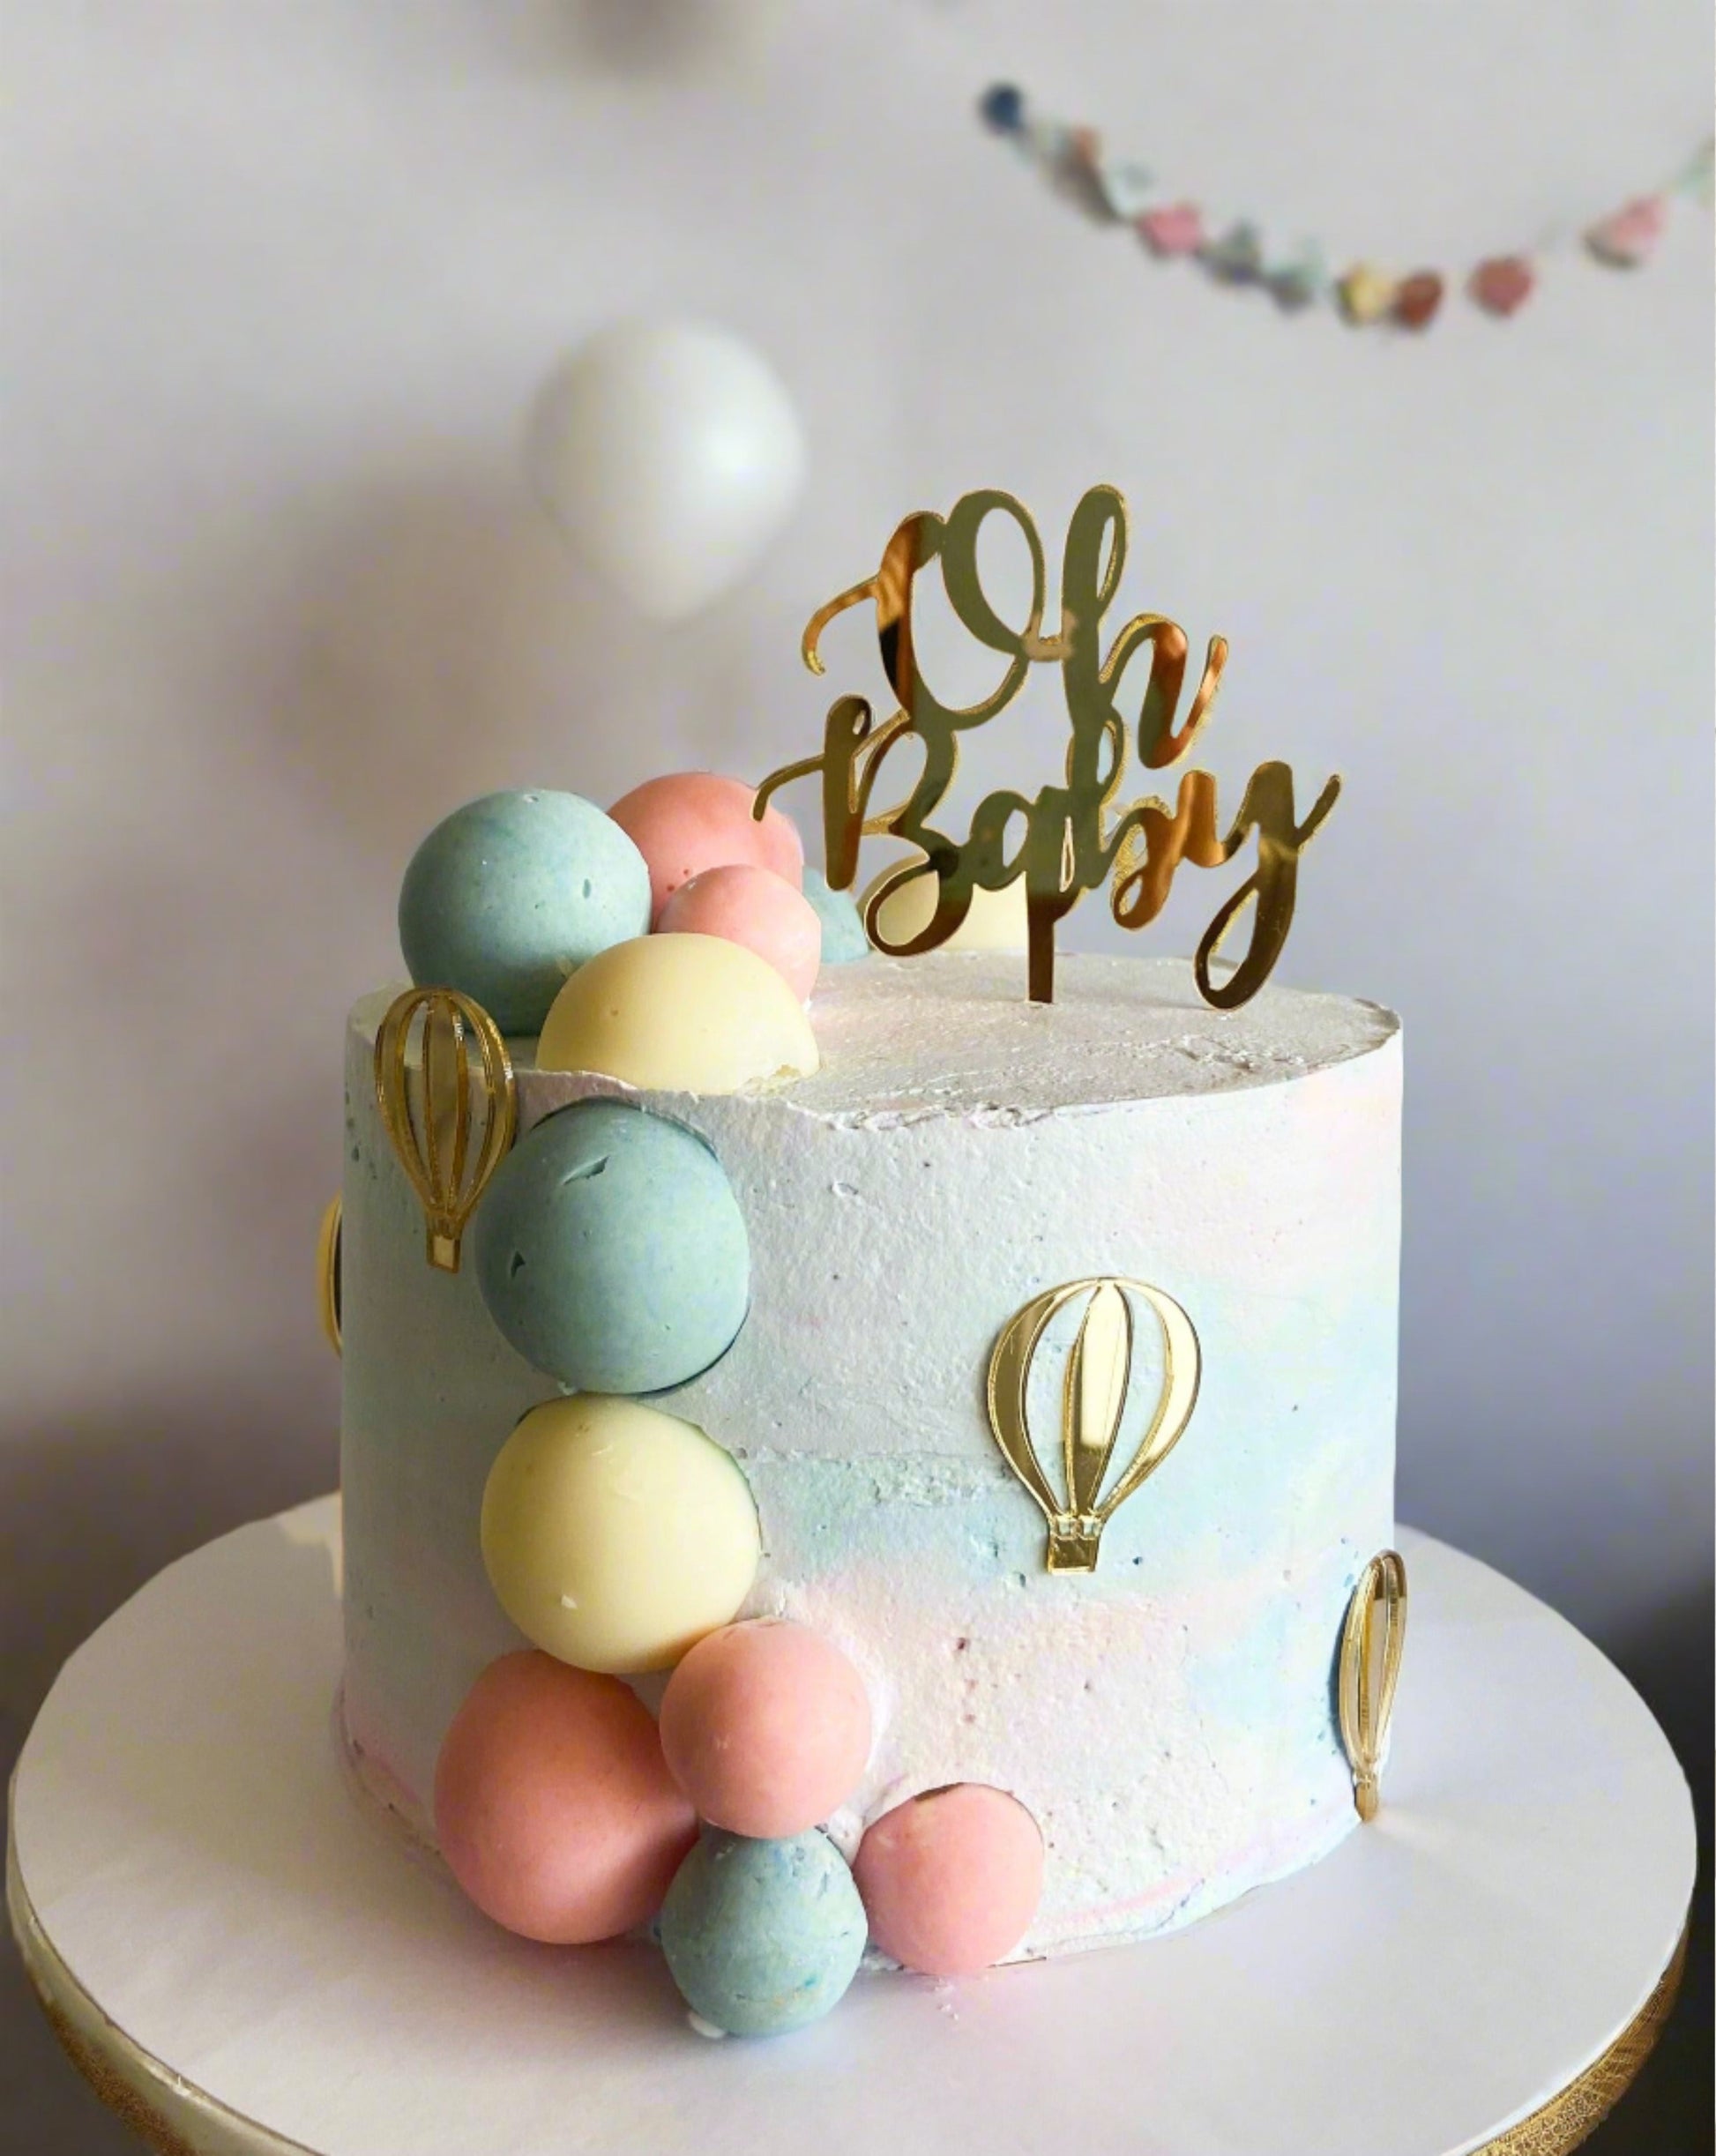 Best Baby Shower Cake without fondant In Pune | Order Online